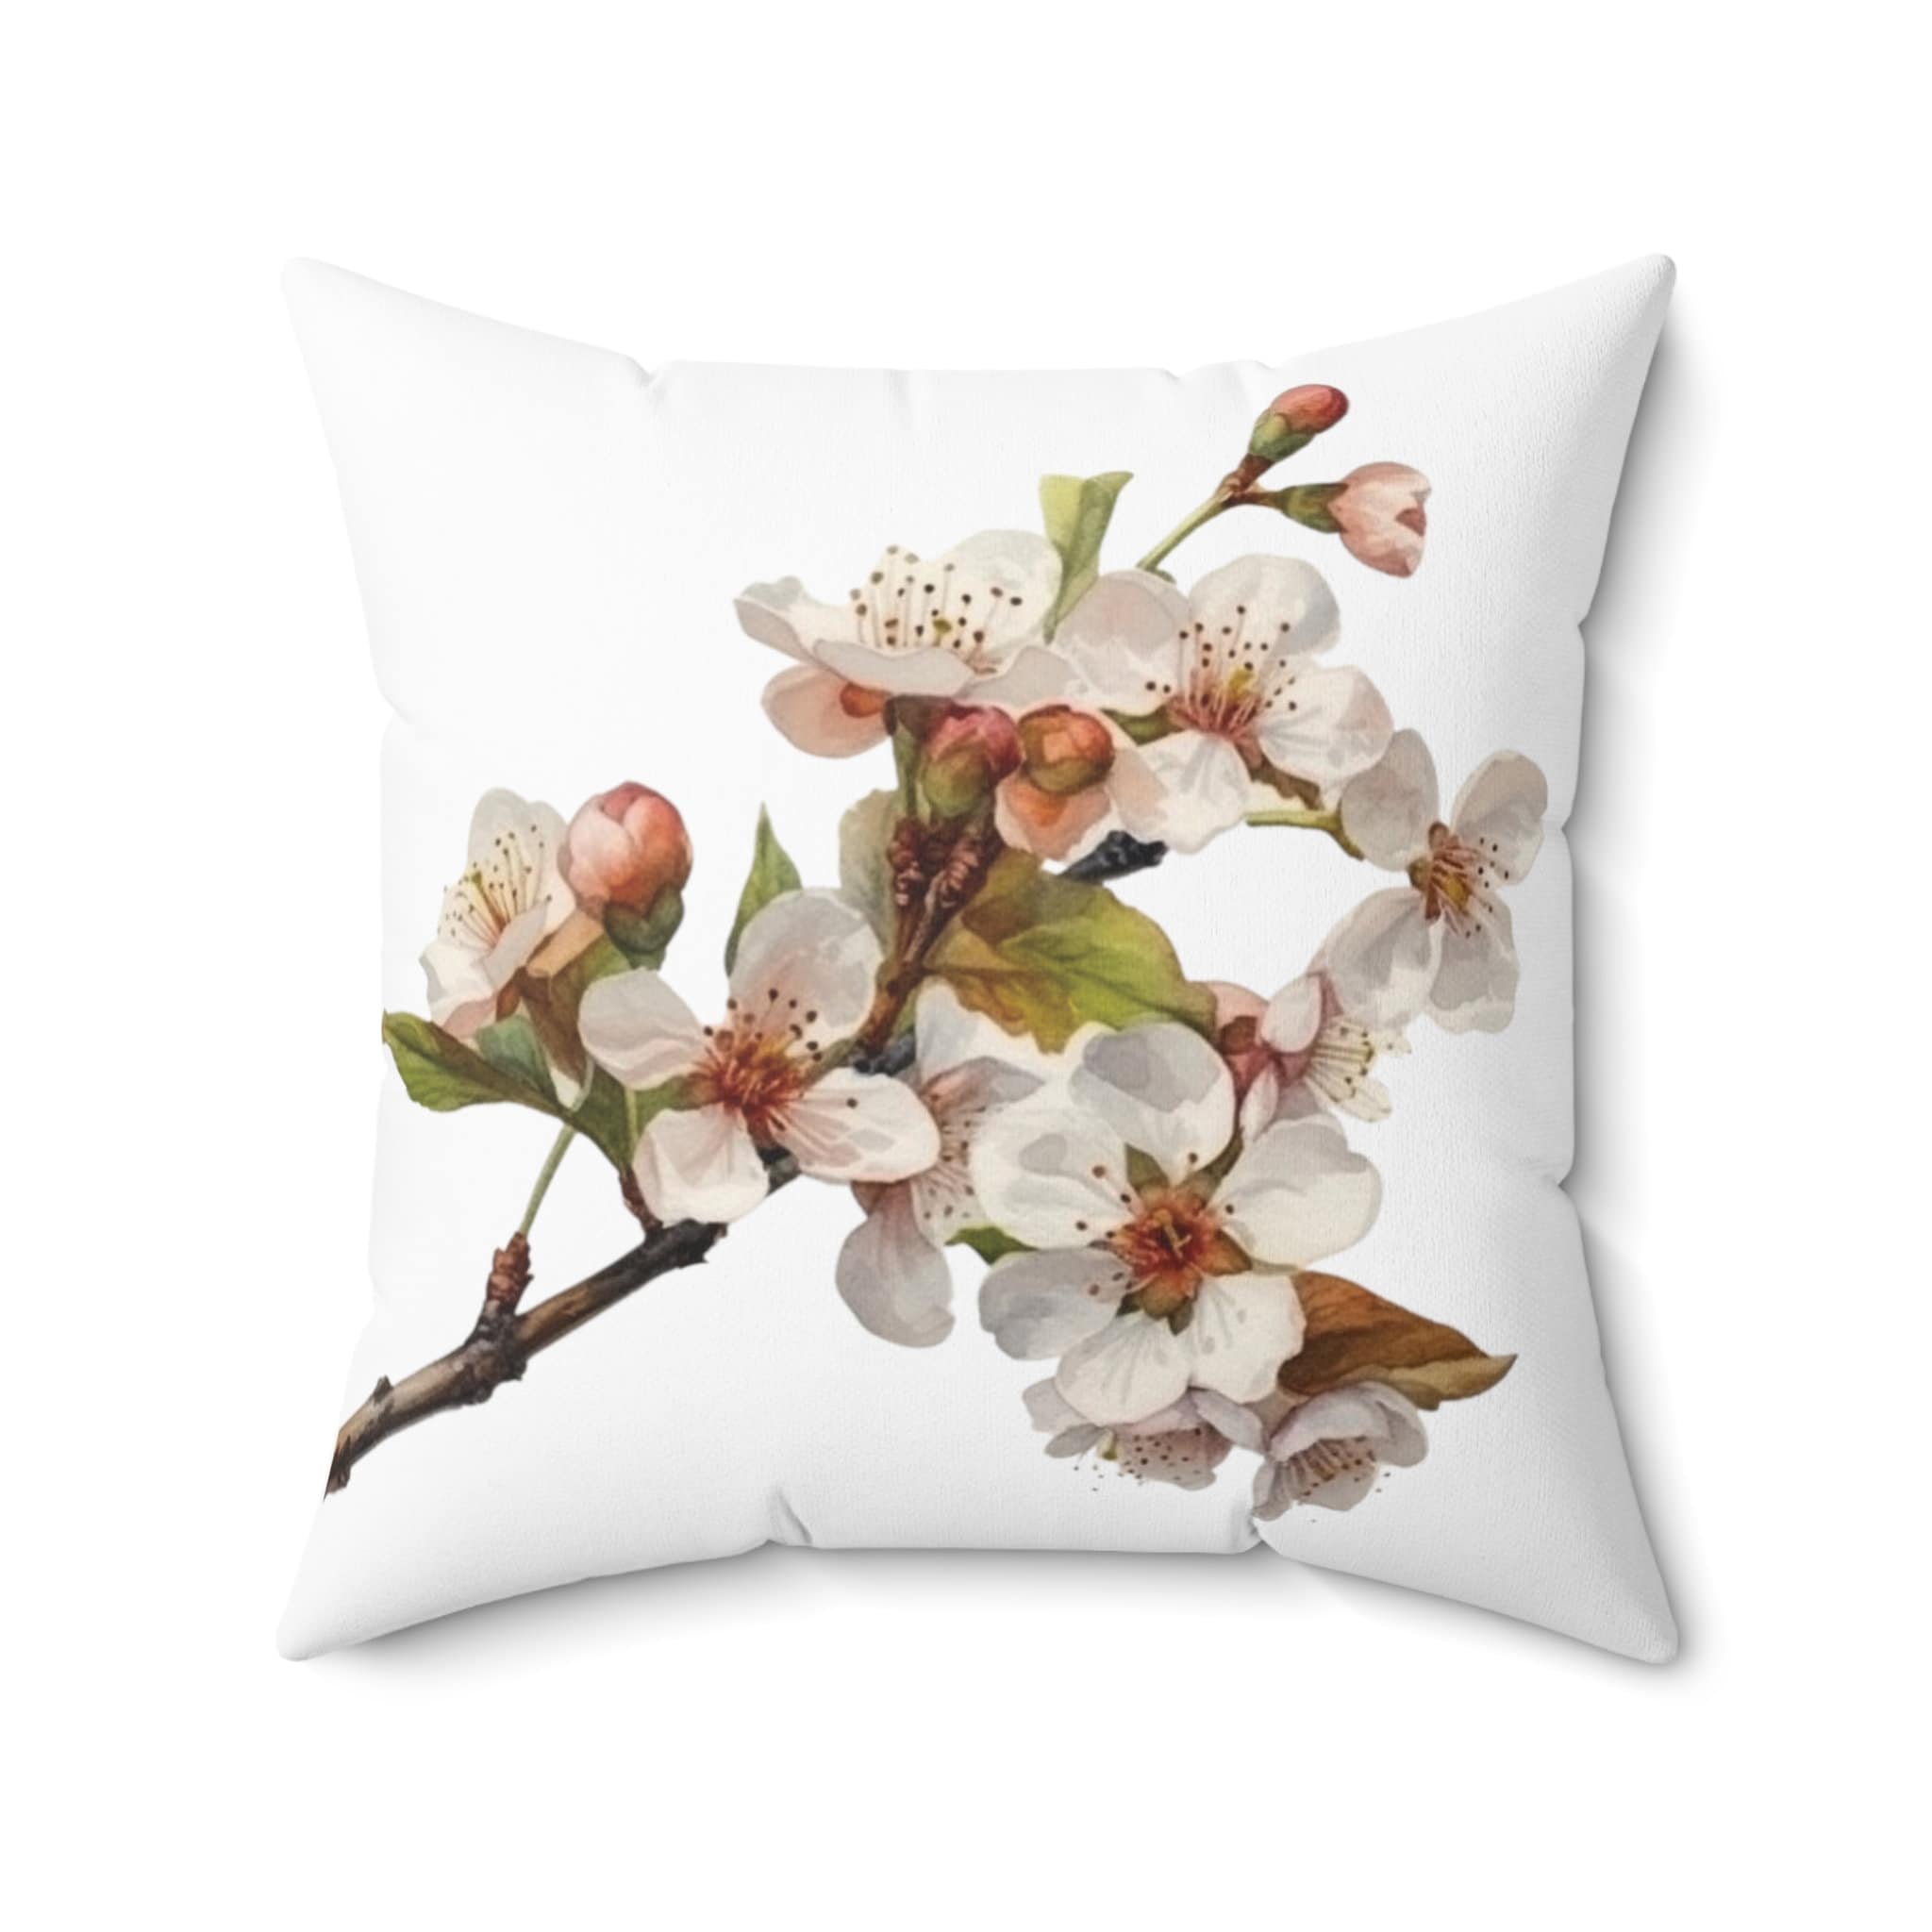 MT 4 Pcs Sublimation Pillow Covers Blank 16x16 Inch/ 18x18 Inch